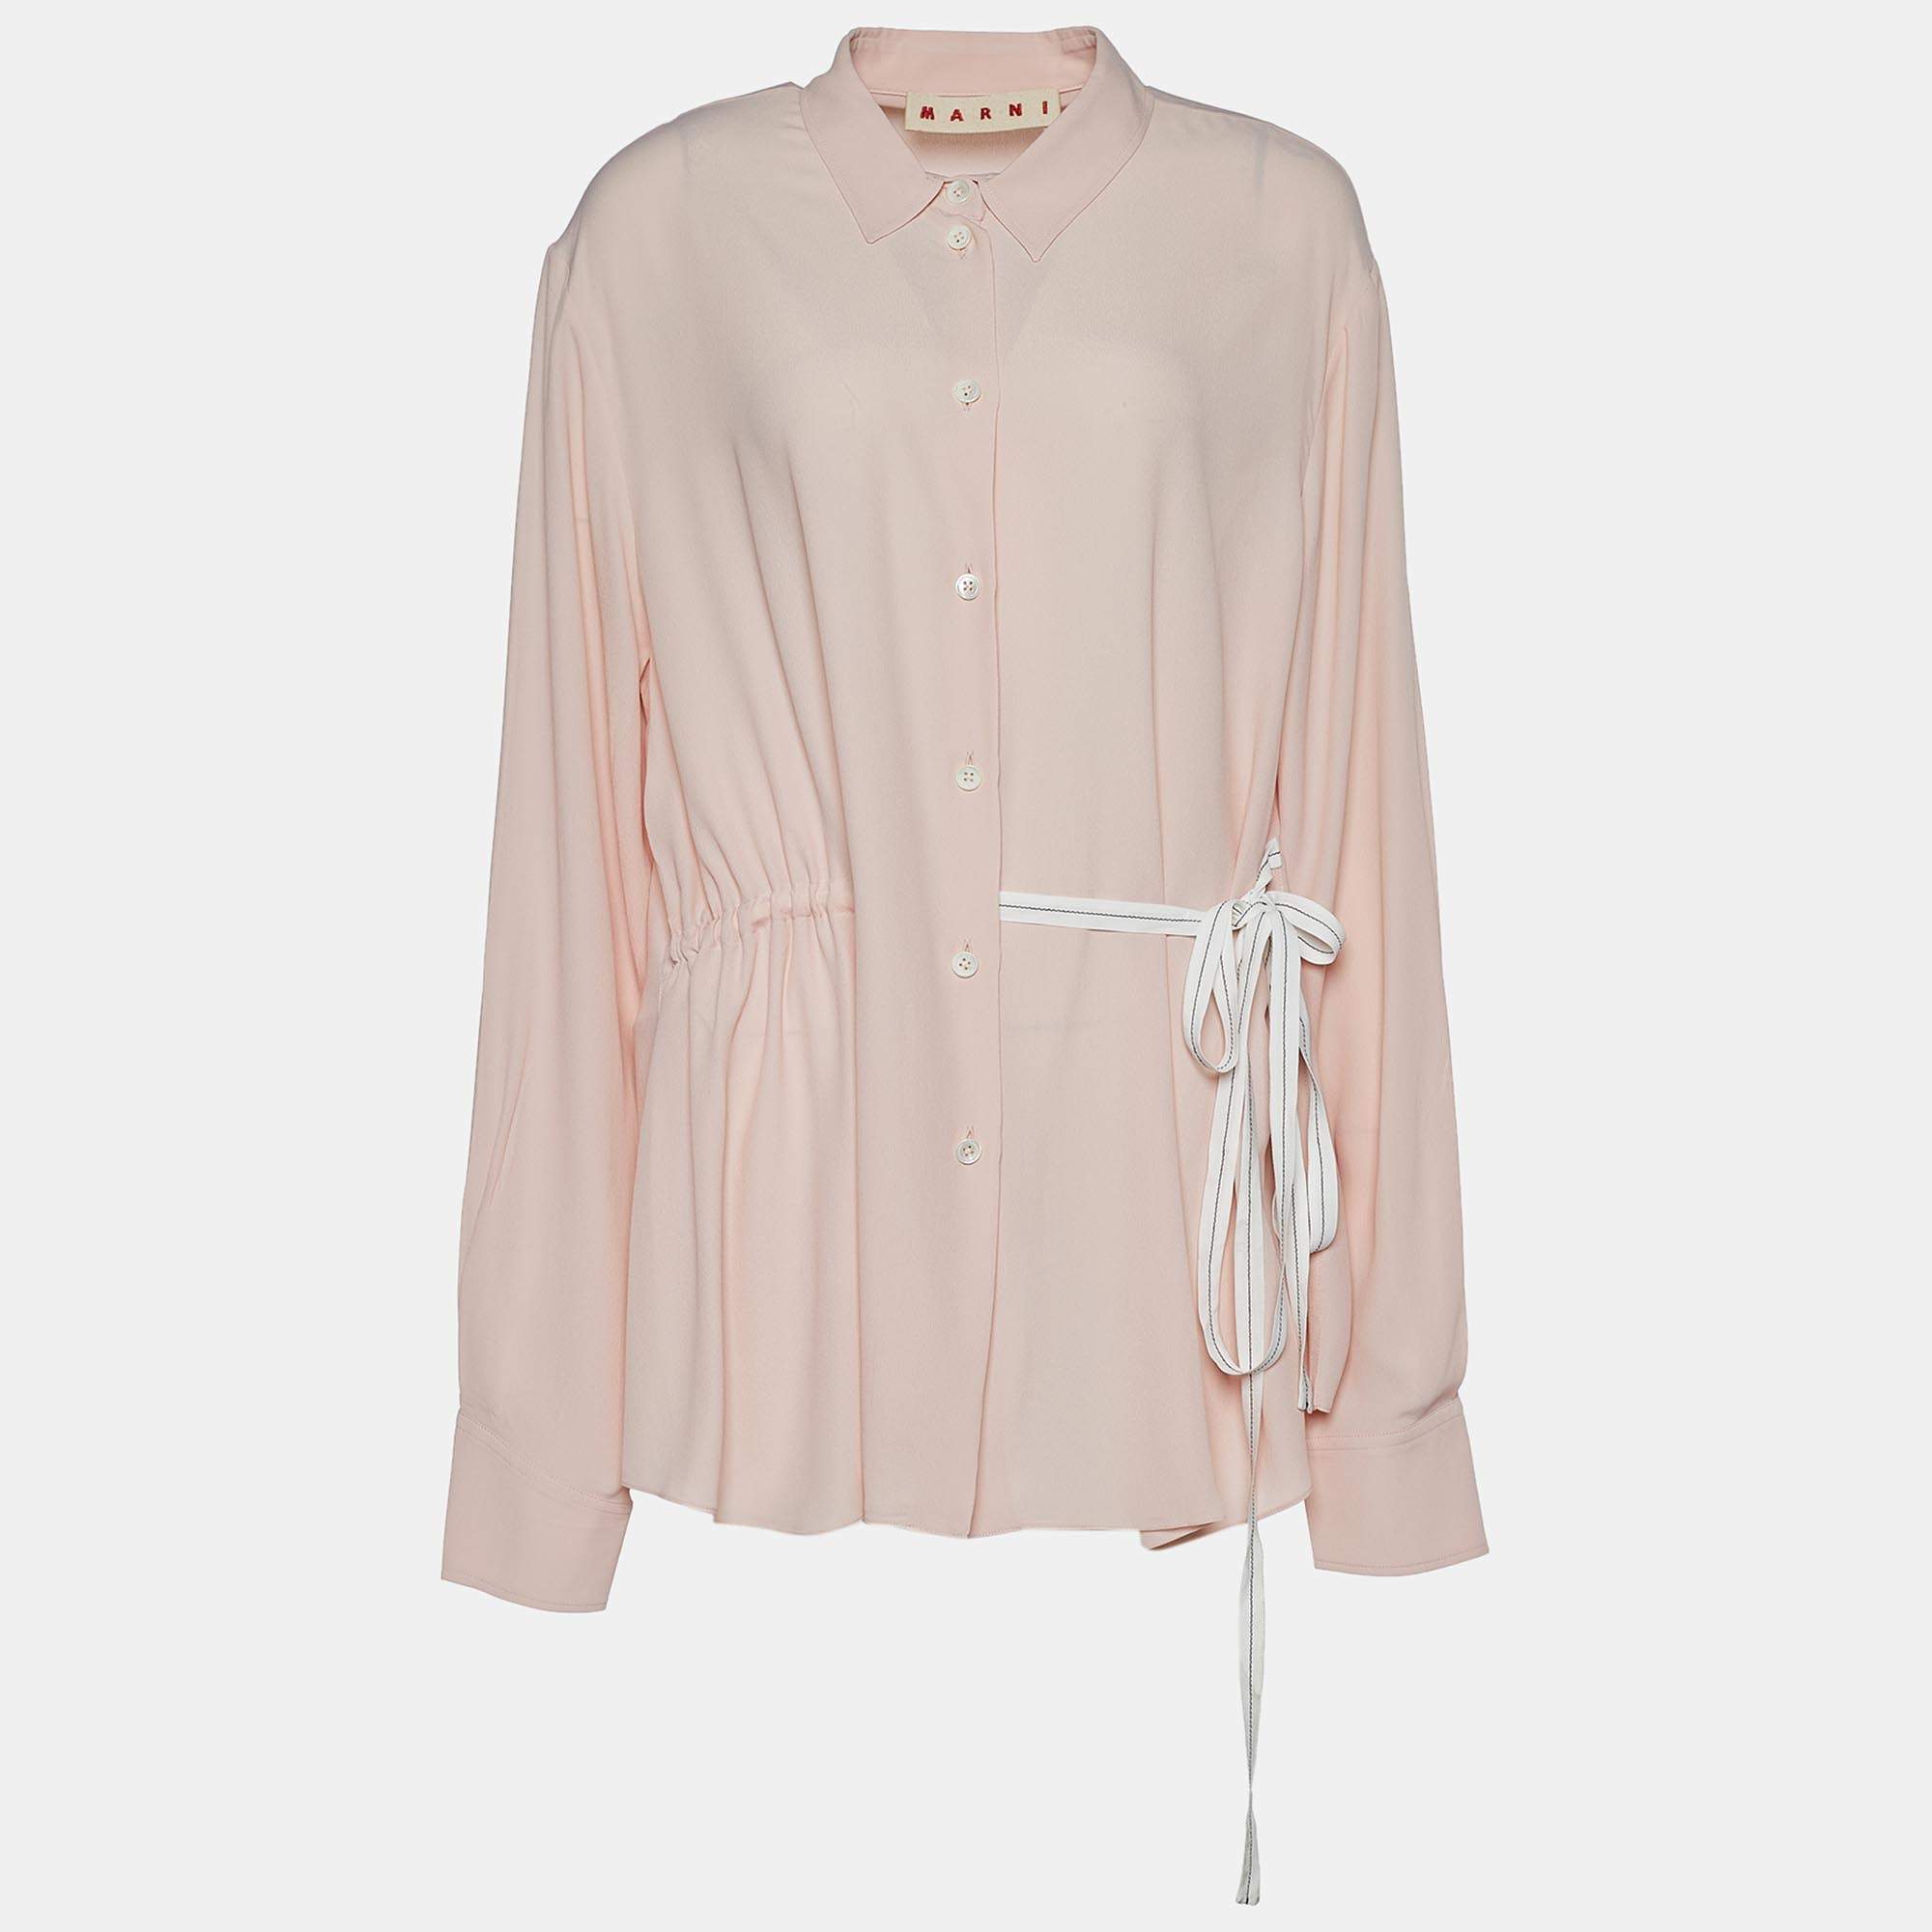 Marni Blush Pink Crepe Silk Button Front Belted Button Front Blouse M